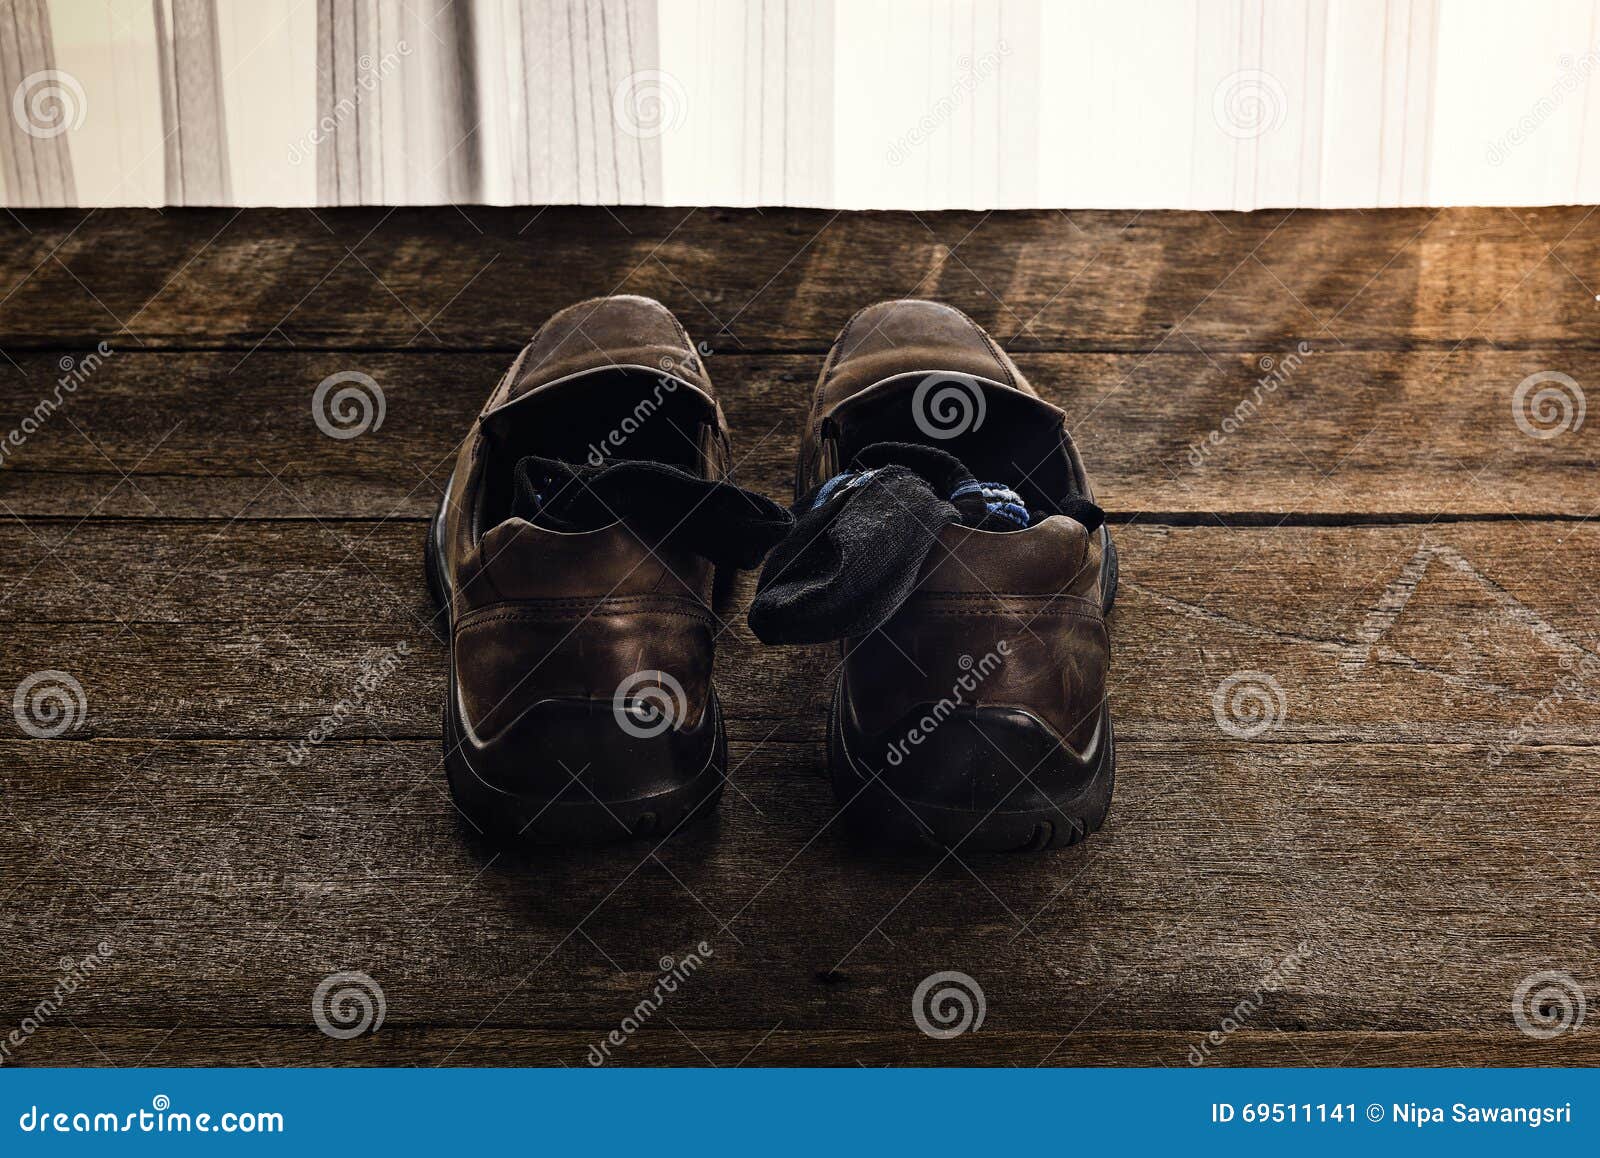 Men S Shoes and Sock on Wooden Background Stock Image - Image of shoe ...